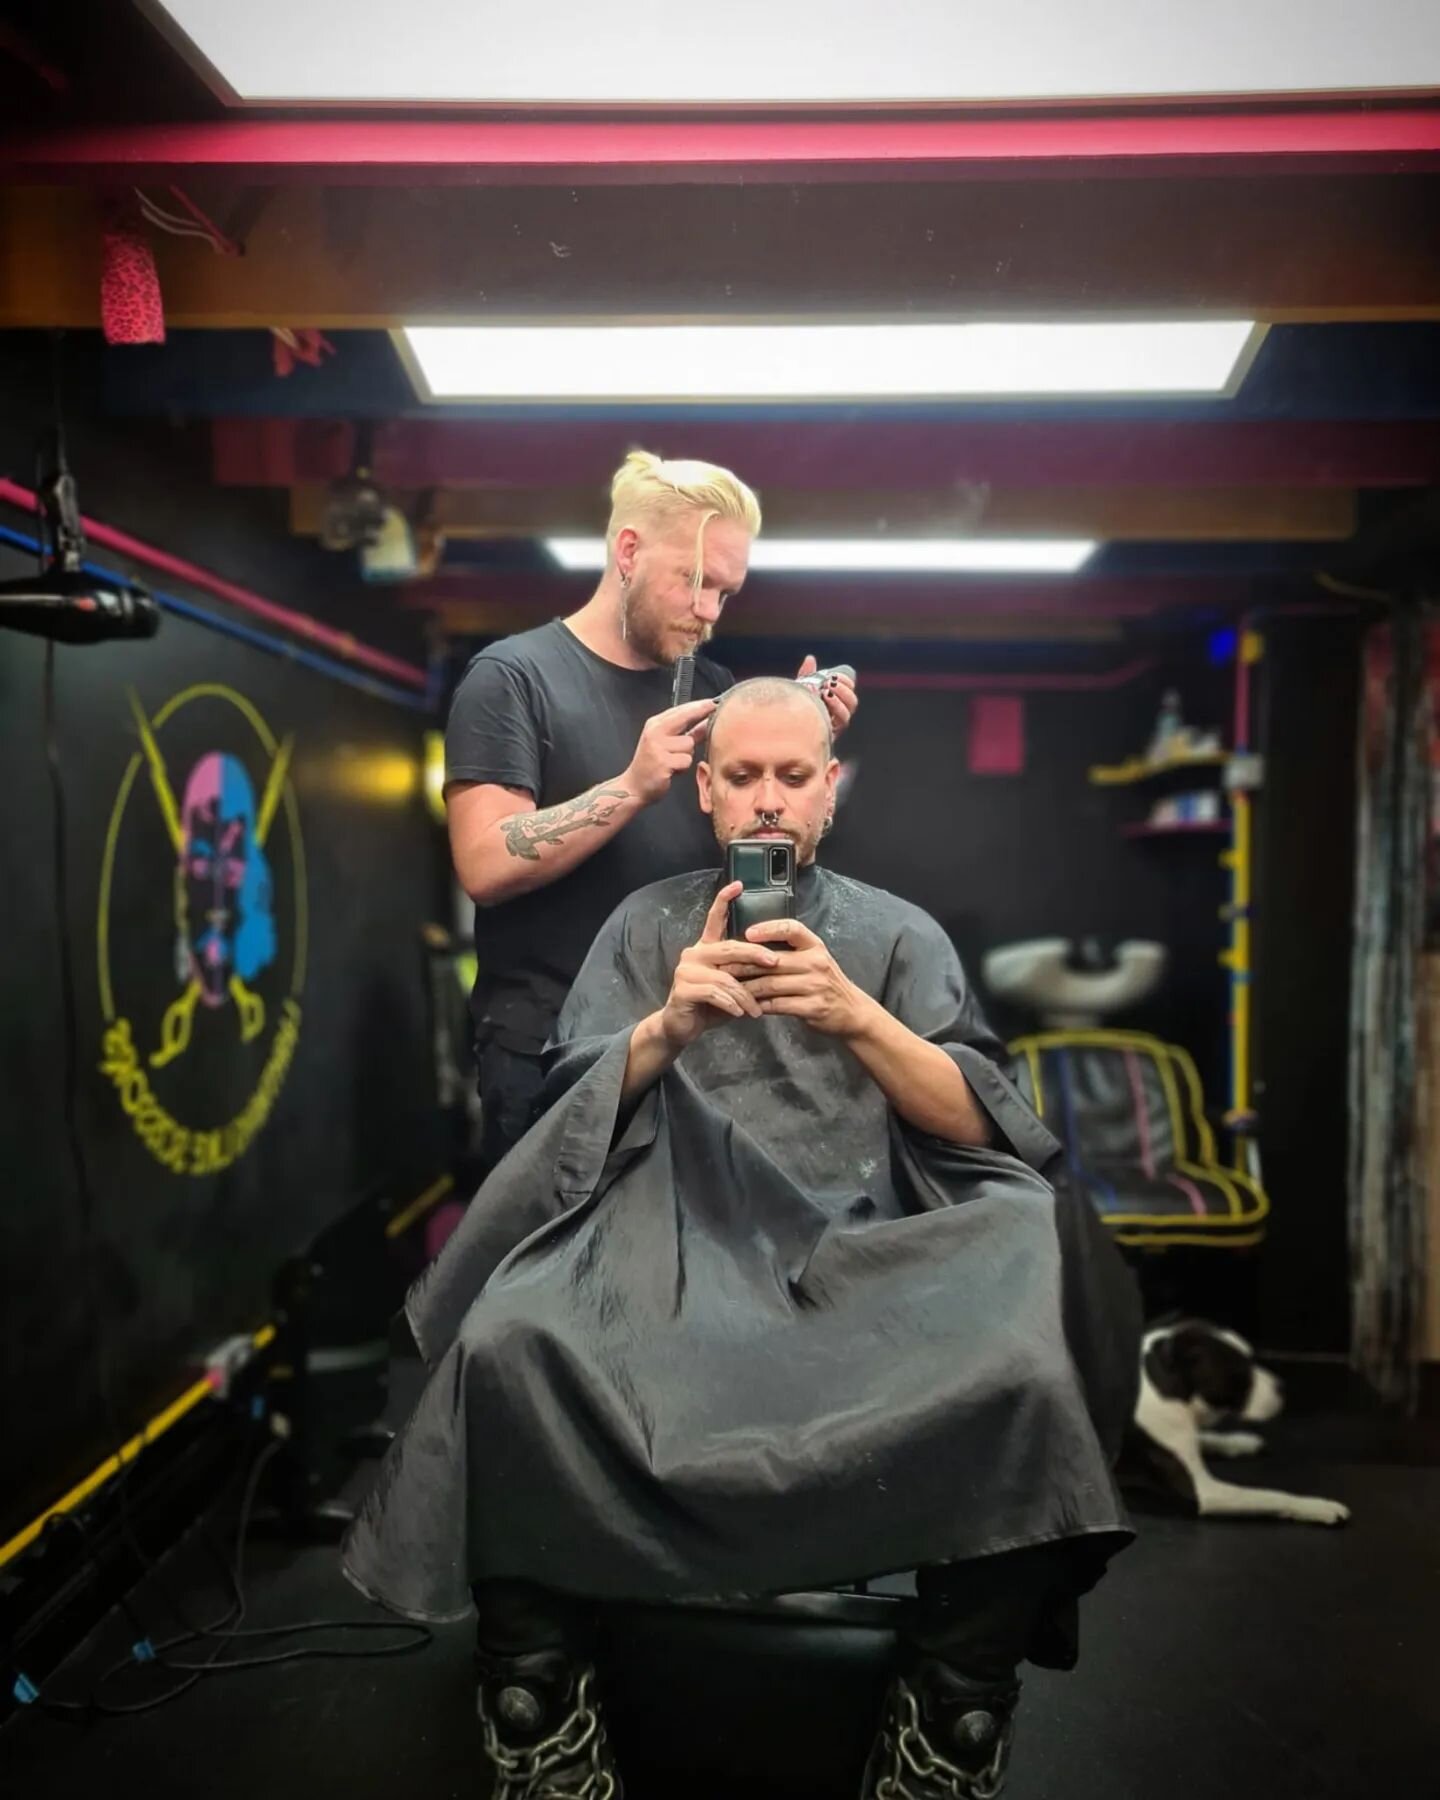 ⚡️&quot;Cayden's so good, even I come to him to get my hair done!&quot; ⭐️⭐️⭐️⭐️⭐️ - Buck Rumstache⚡️✂️

⚡Follow @lightninglikescissors, click BOOK NOW and download the Booksy app to get your appointment today!⚡
.
.
.
.
.
#brightonhair #brightonhaird